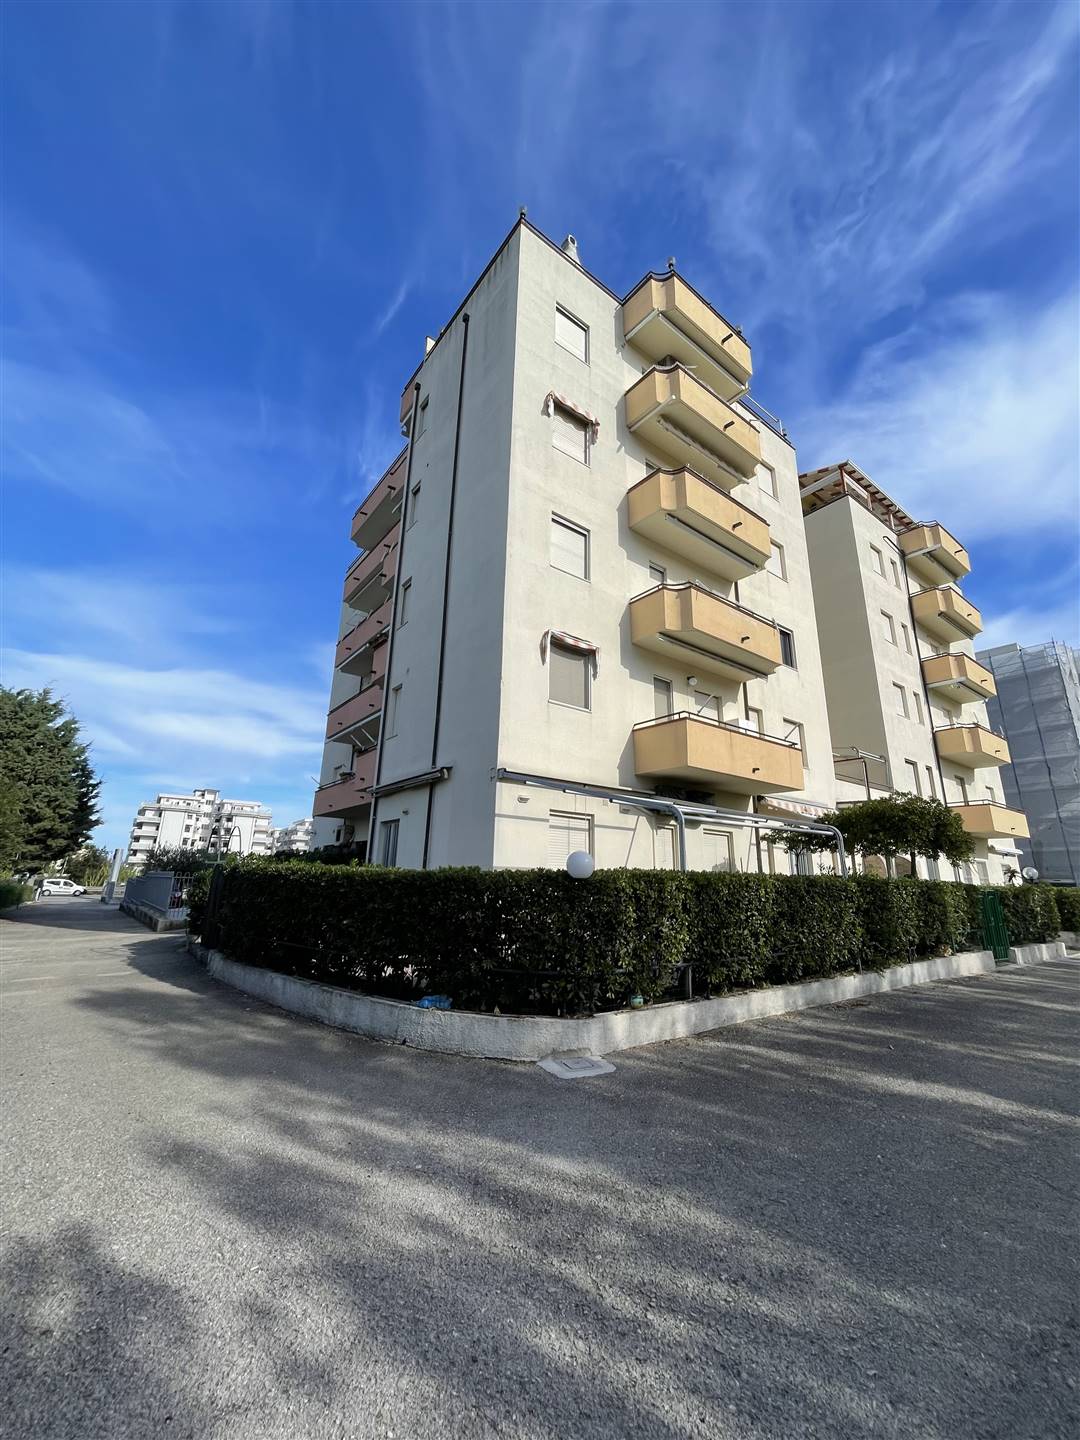 SAN SALVO MARINA, SAN SALVO, Apartment for sale of 46 Sq. mt., Habitable, Heating Non-existent, Energetic class: G, Epi: 0 kwh/m2 year, placed at 2° 